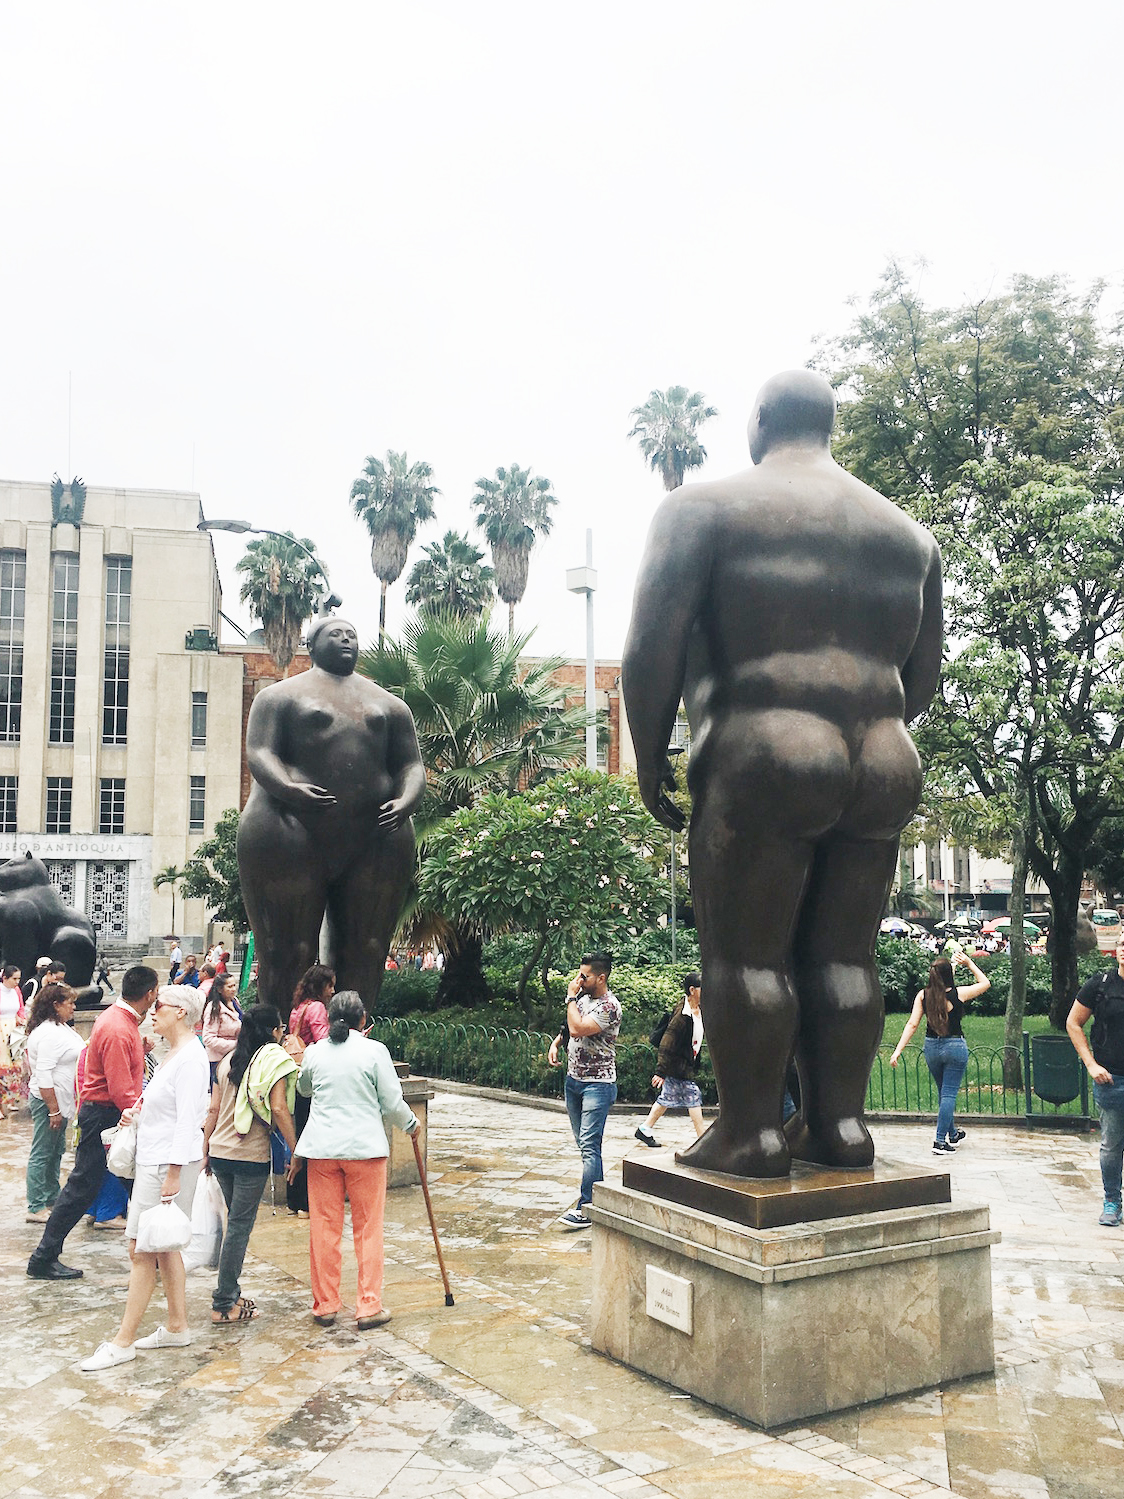  Fernando Botero is one of Colombia's most famous artists, known for his roundly-figured sculptures and paintings. He donated over 100 of pieces of work to his hometown of Medellín, on display in this public square and in the Museum of Antioquia (seen in background on left). 